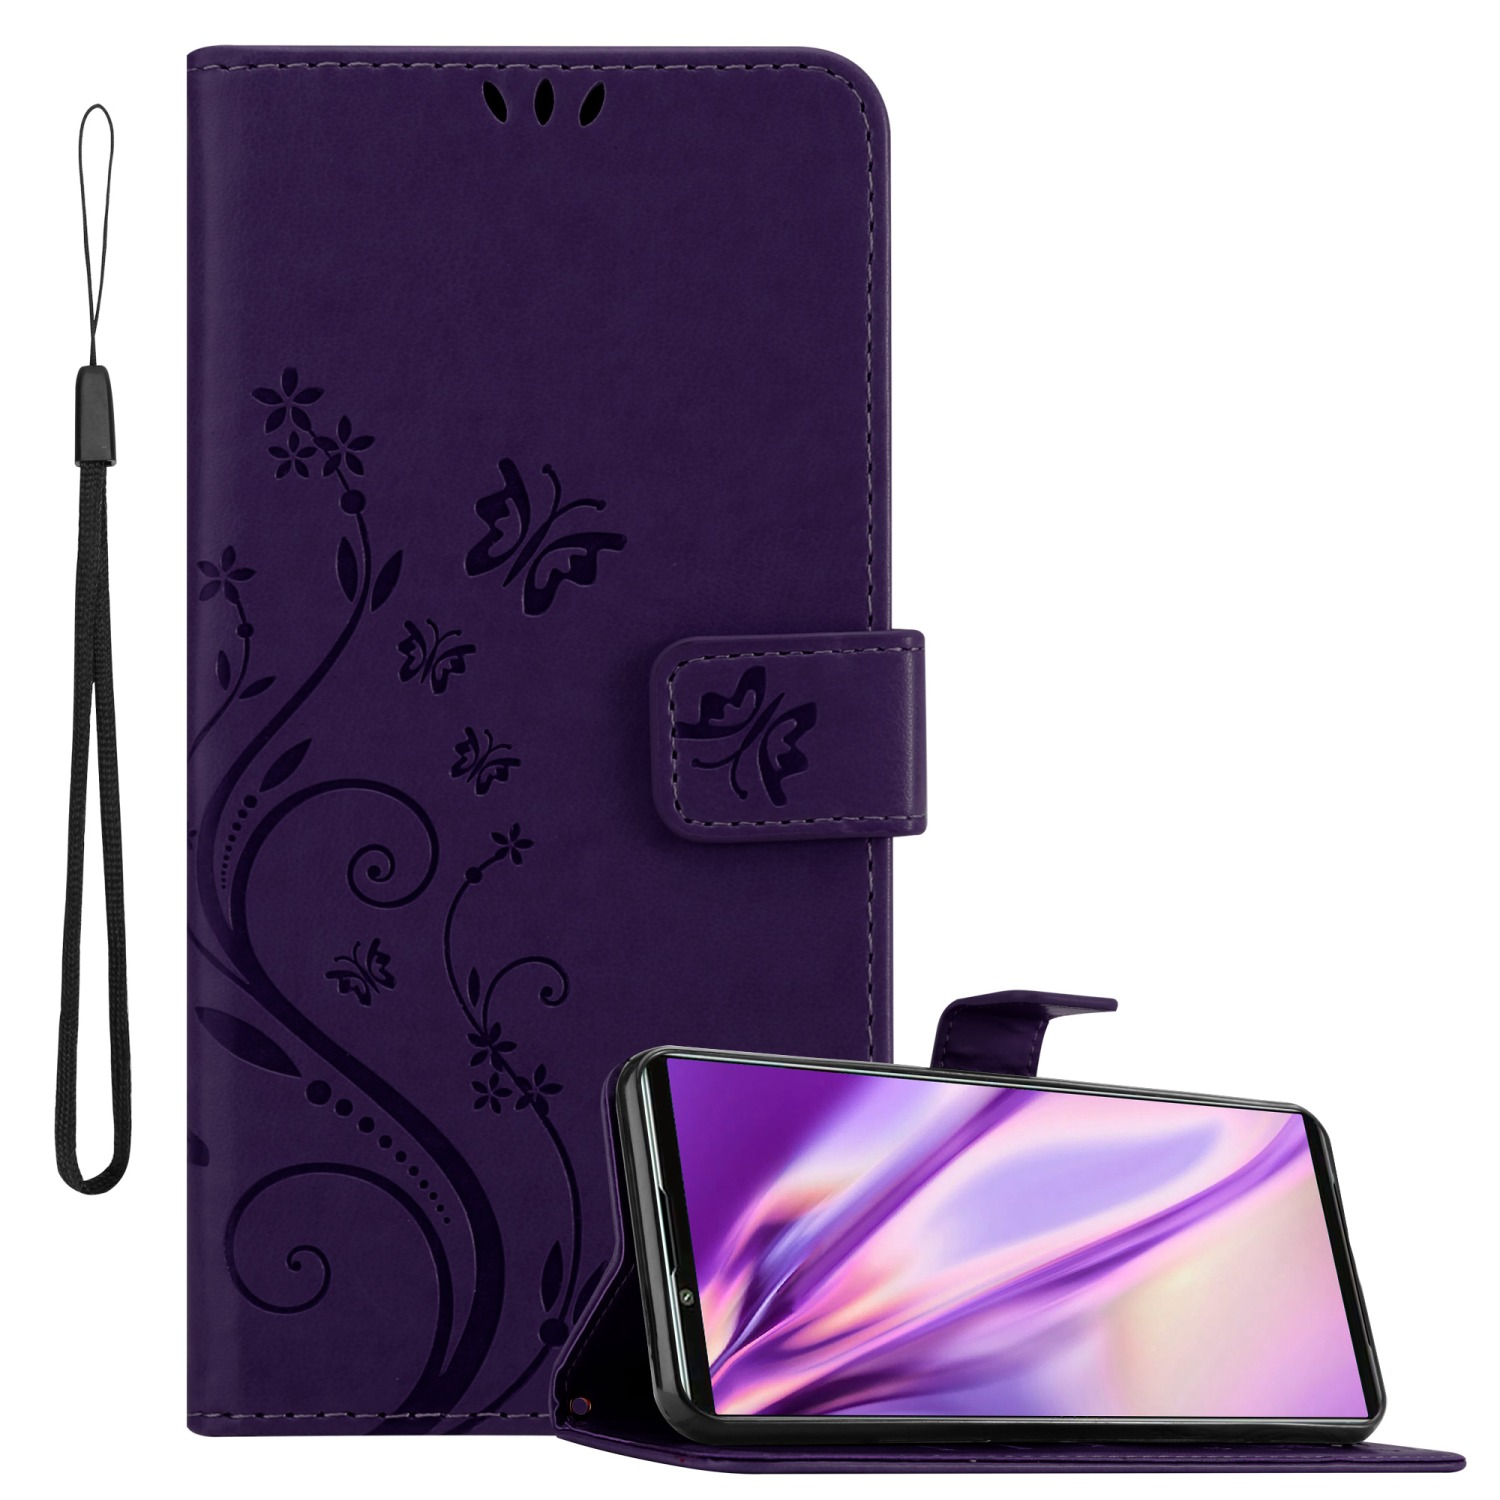 Case, 5 CADORABO Muster III, LILA Flower Hülle Sony, Bookcover, FLORAL Blumen DUNKEL Xperia